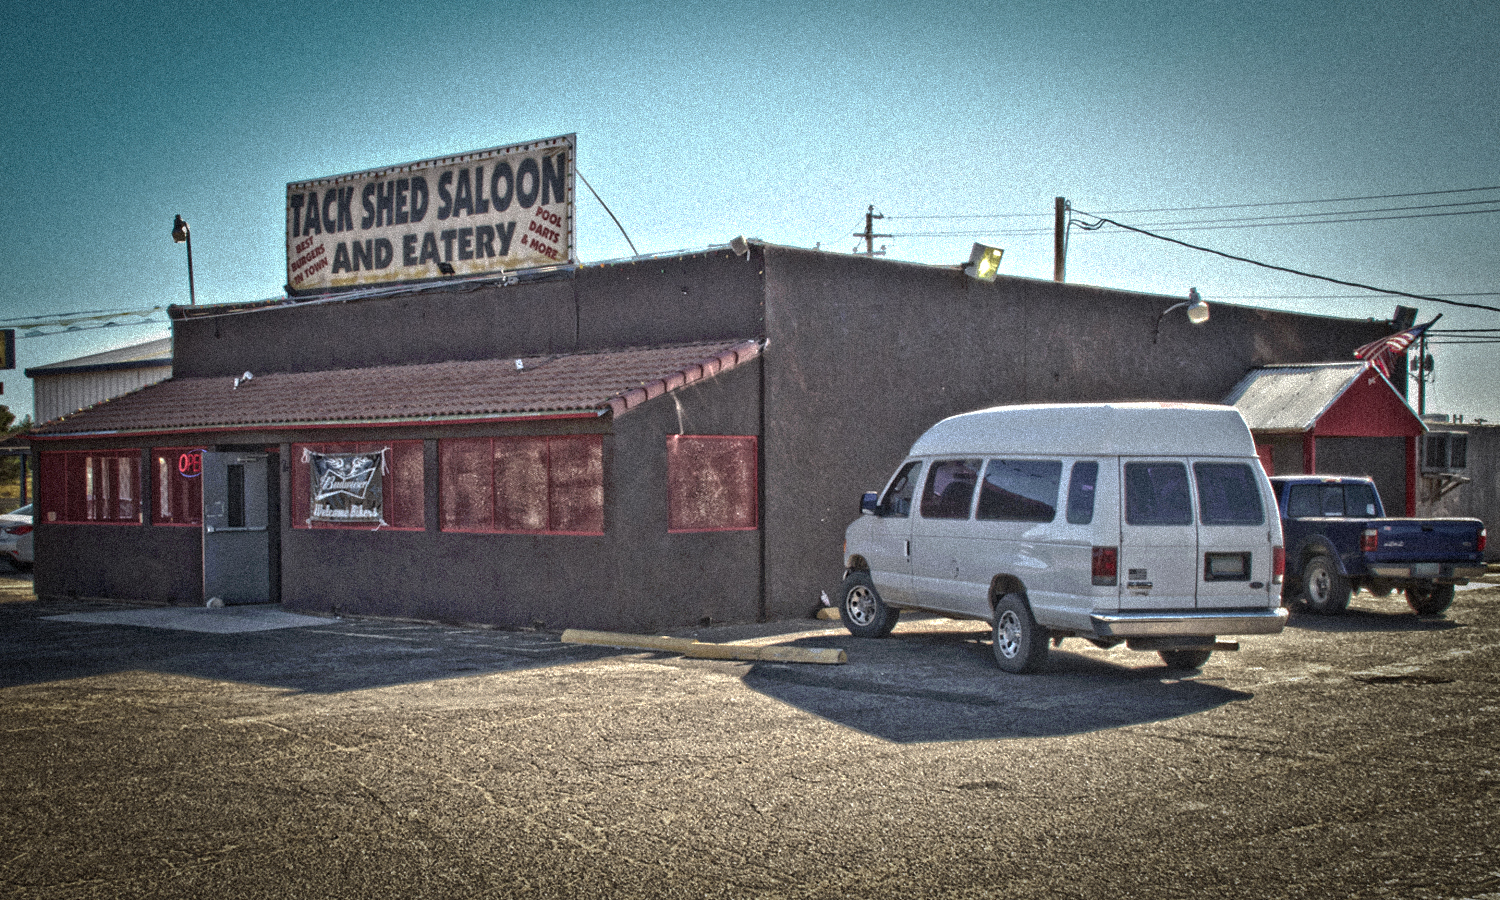 The Tack Shed Saloon & Eatery Inc.